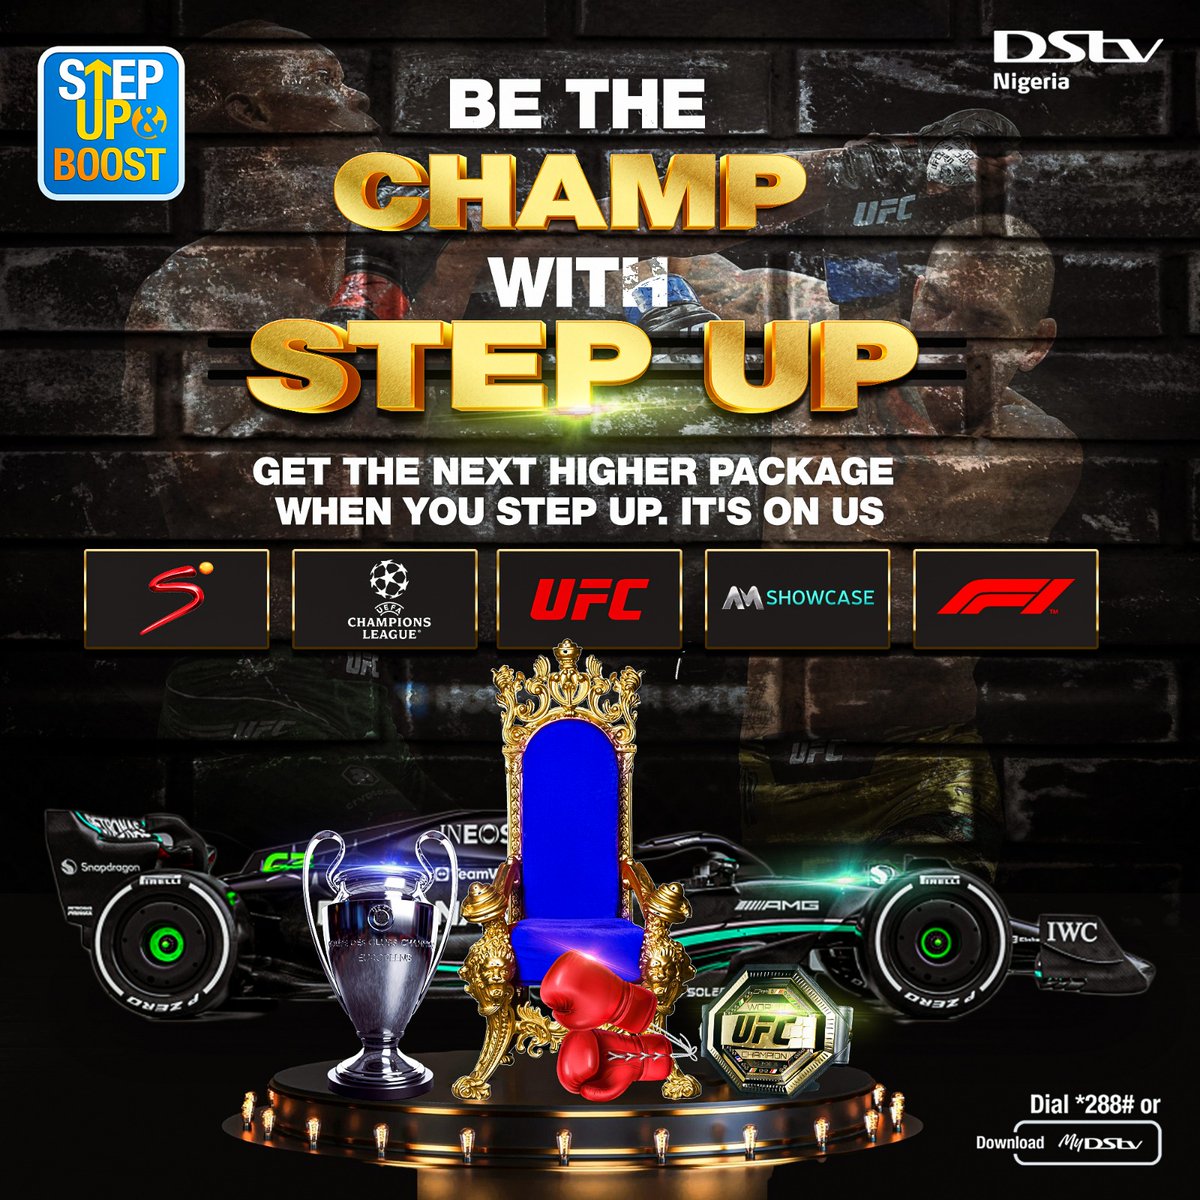 Step up to the higher side of life and get boosted🚀🚀🚀🚀🚀. Experience unrestricted access to the very best of entertainment today.
#dstvstepup #getboosted #upgrade #dstv